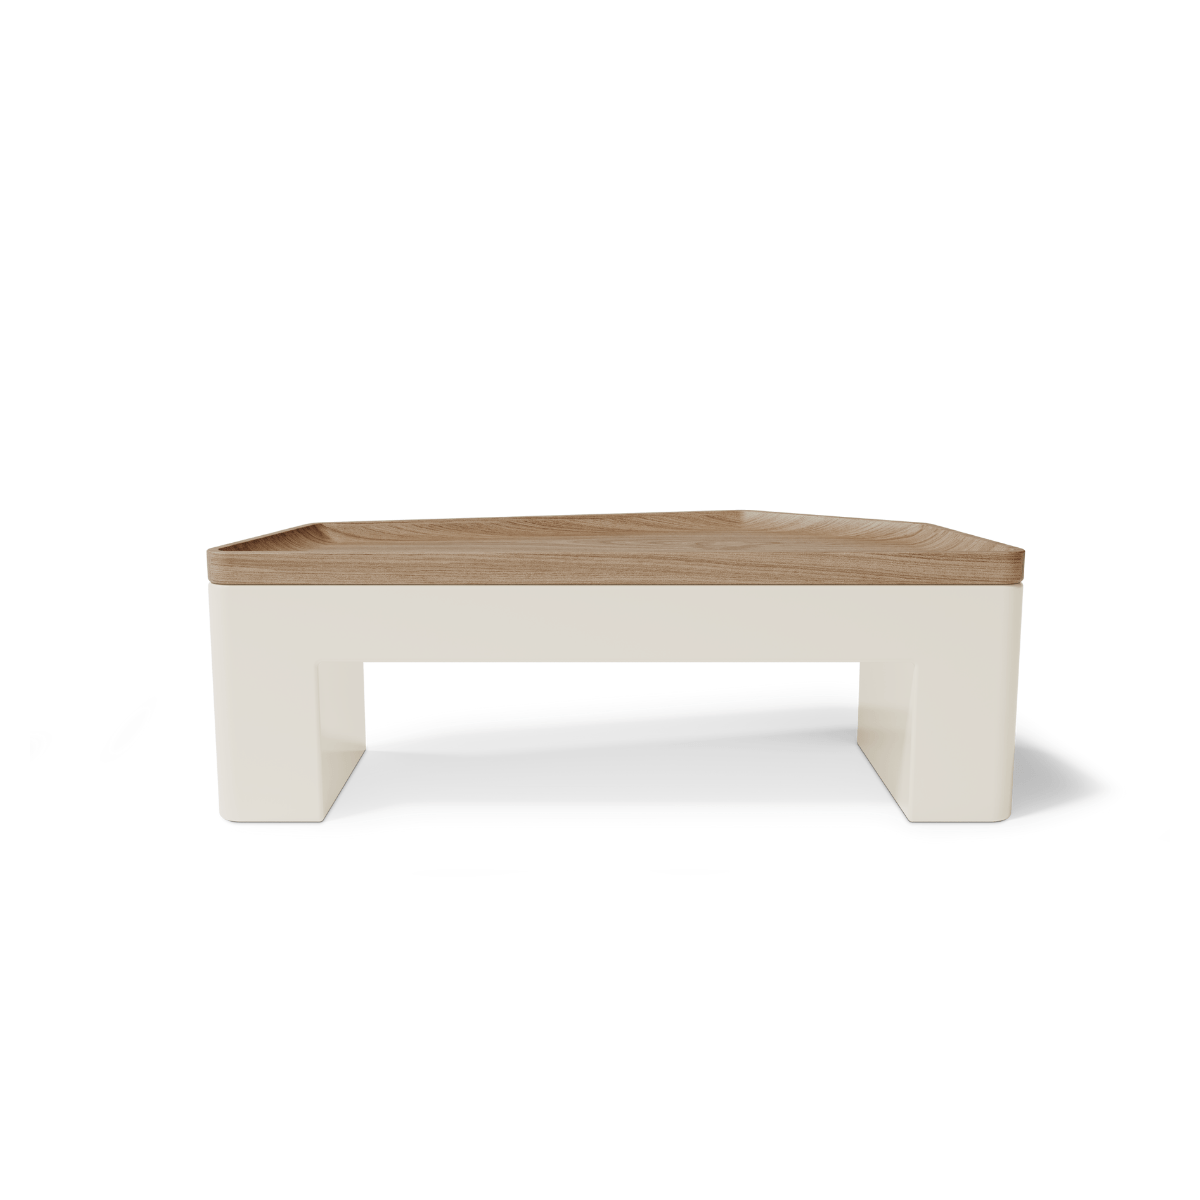 MINAS SMALL CENTER TABLE 4 Breve I Dining Table